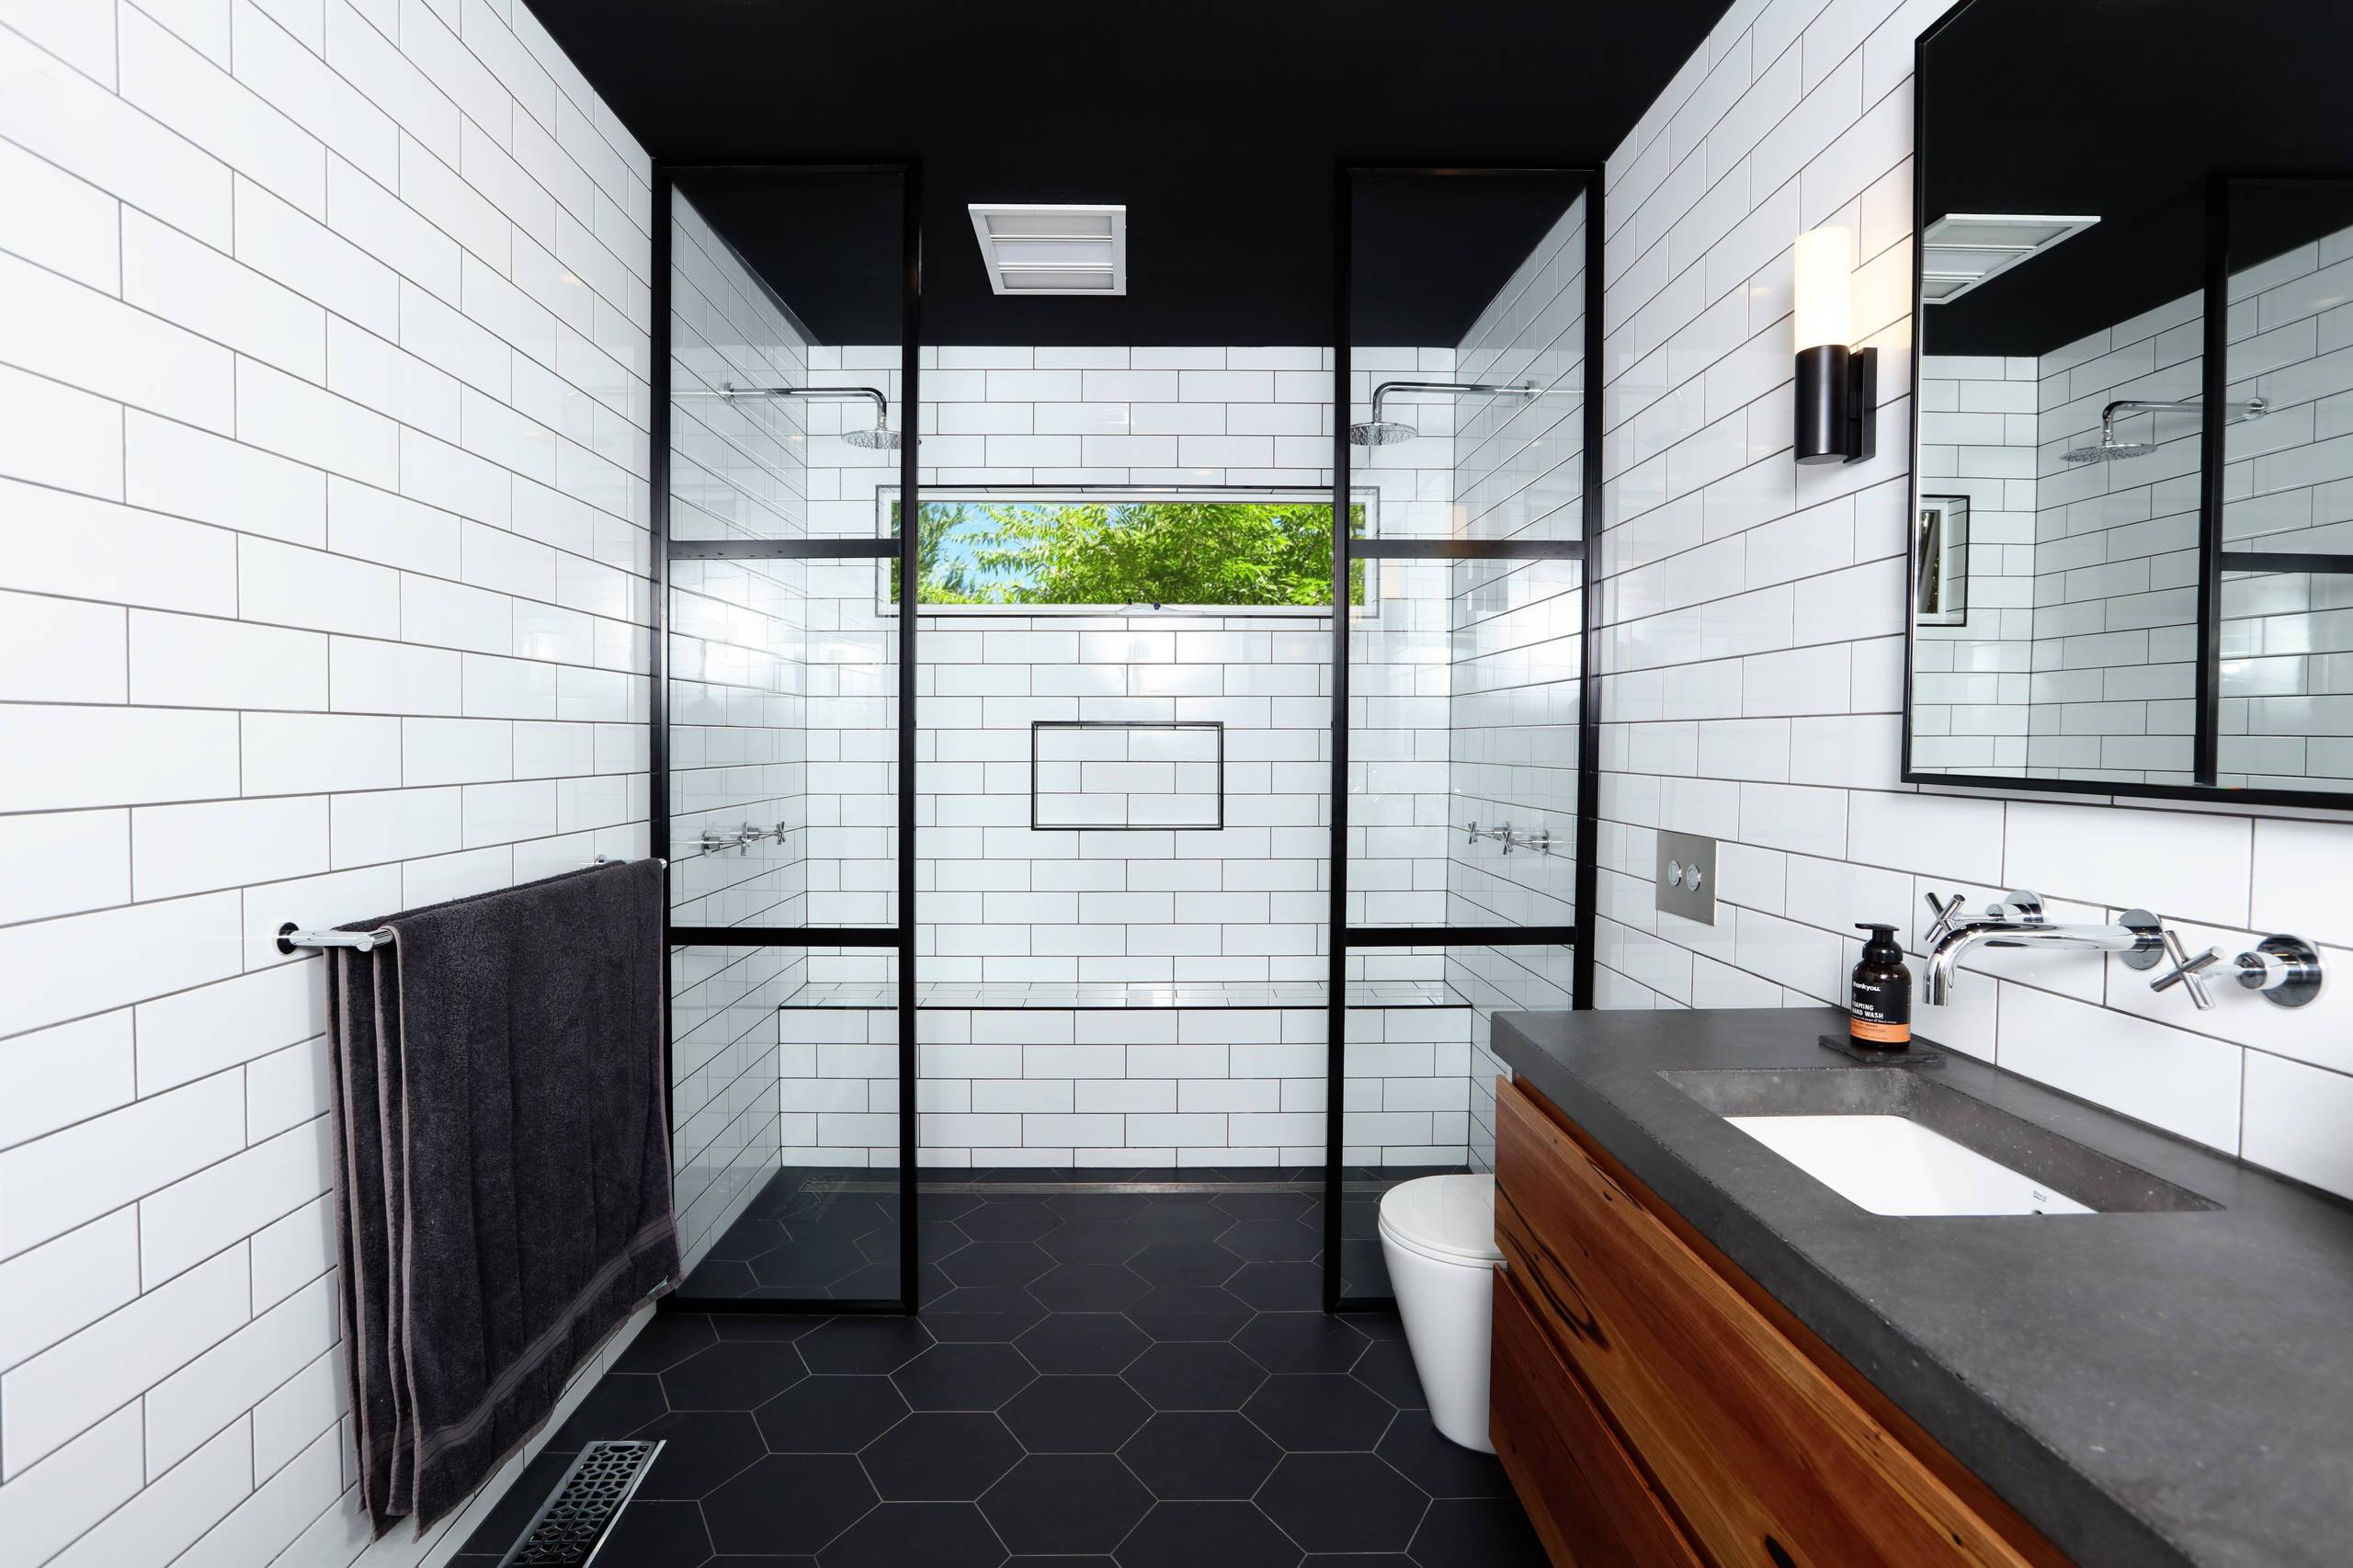 Classic subway tile is the best choice for dramatic flooring (from Houzz)